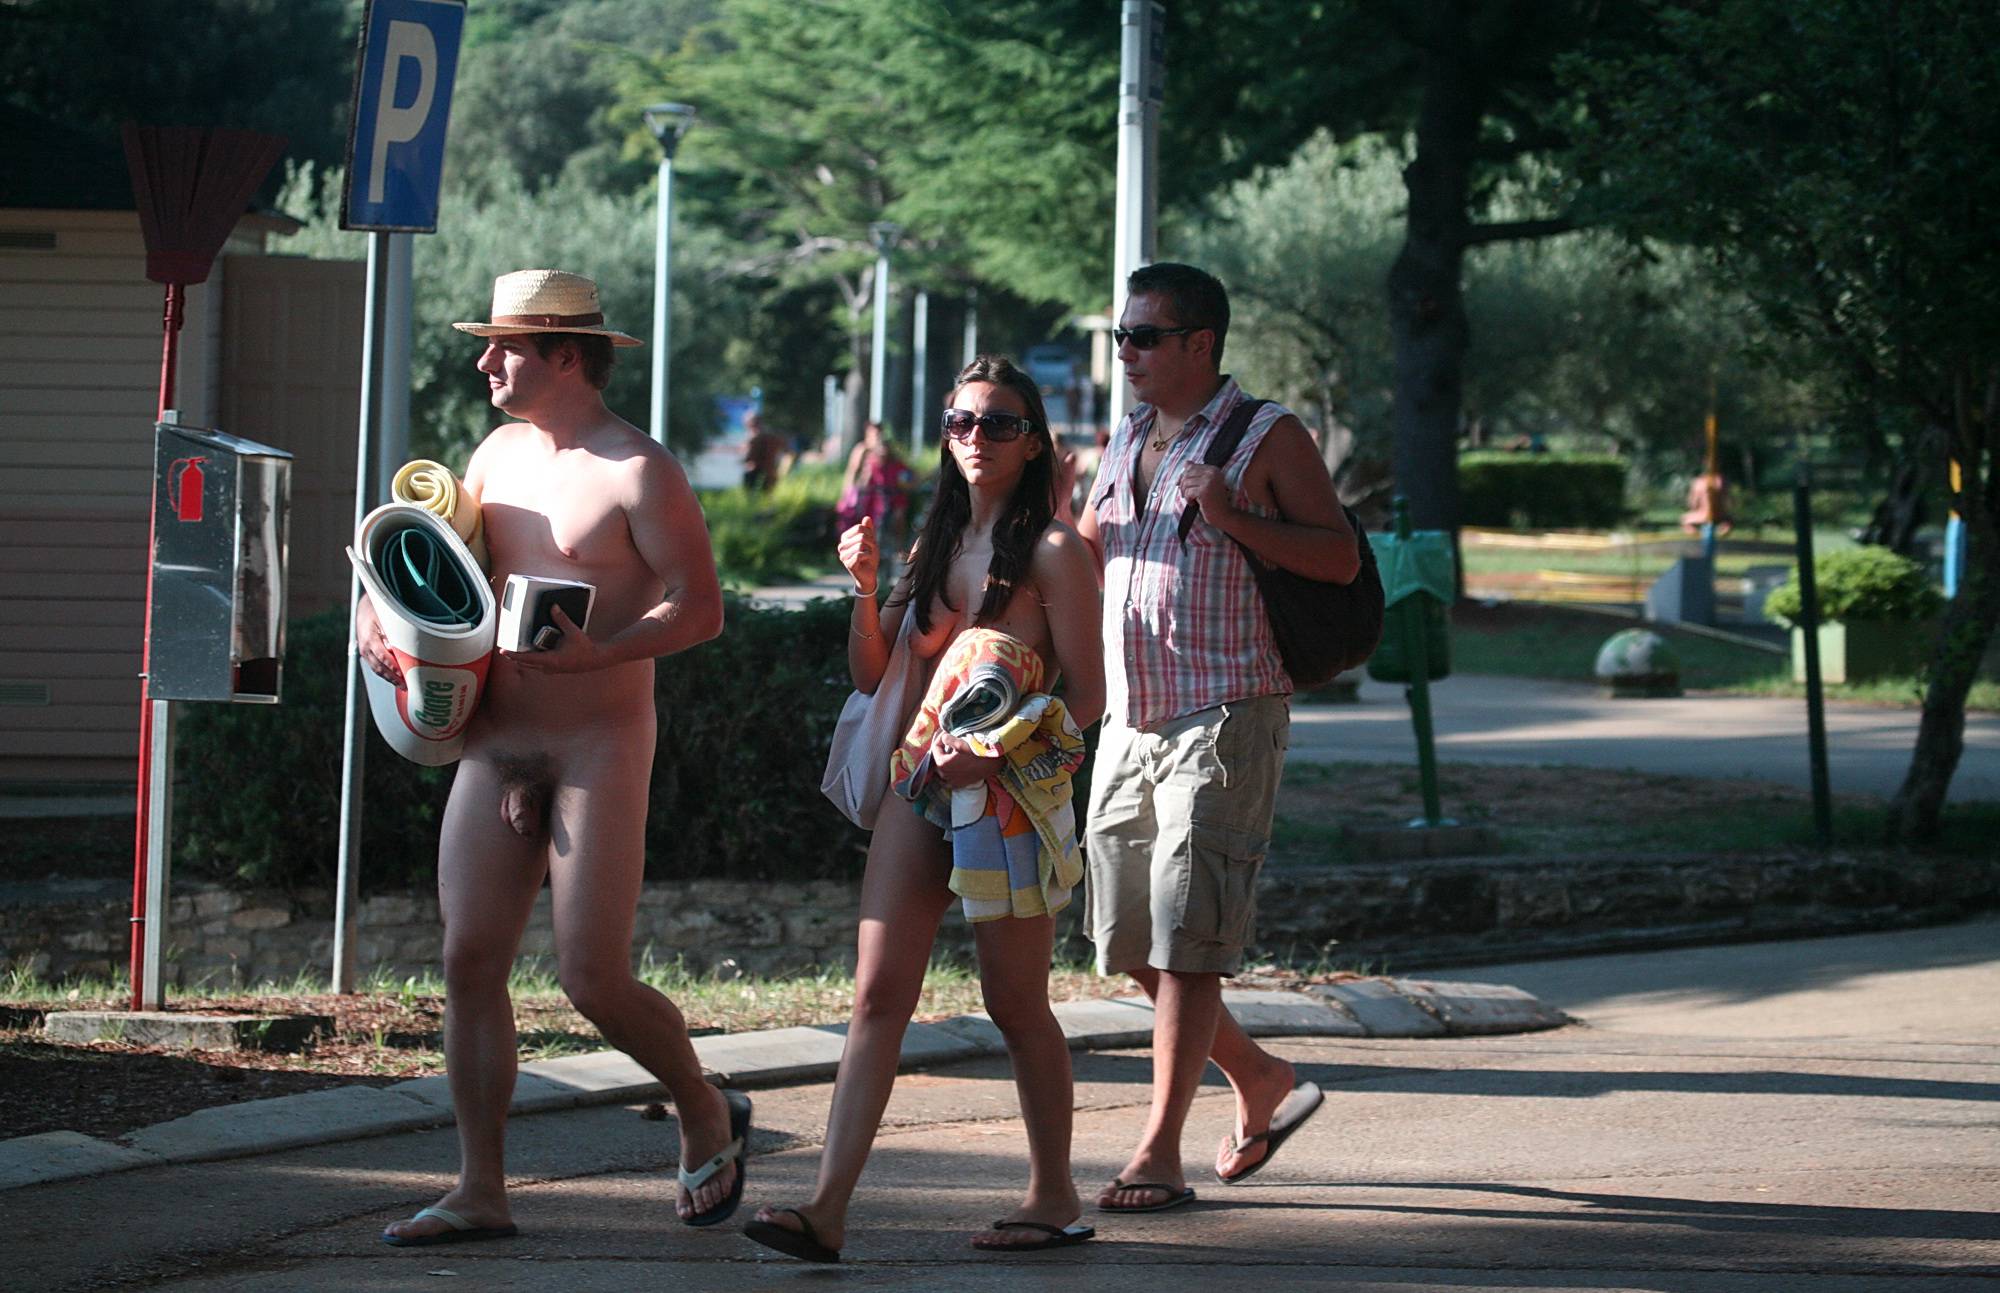 Pure Nudism Pics-Families Returning Home - 4